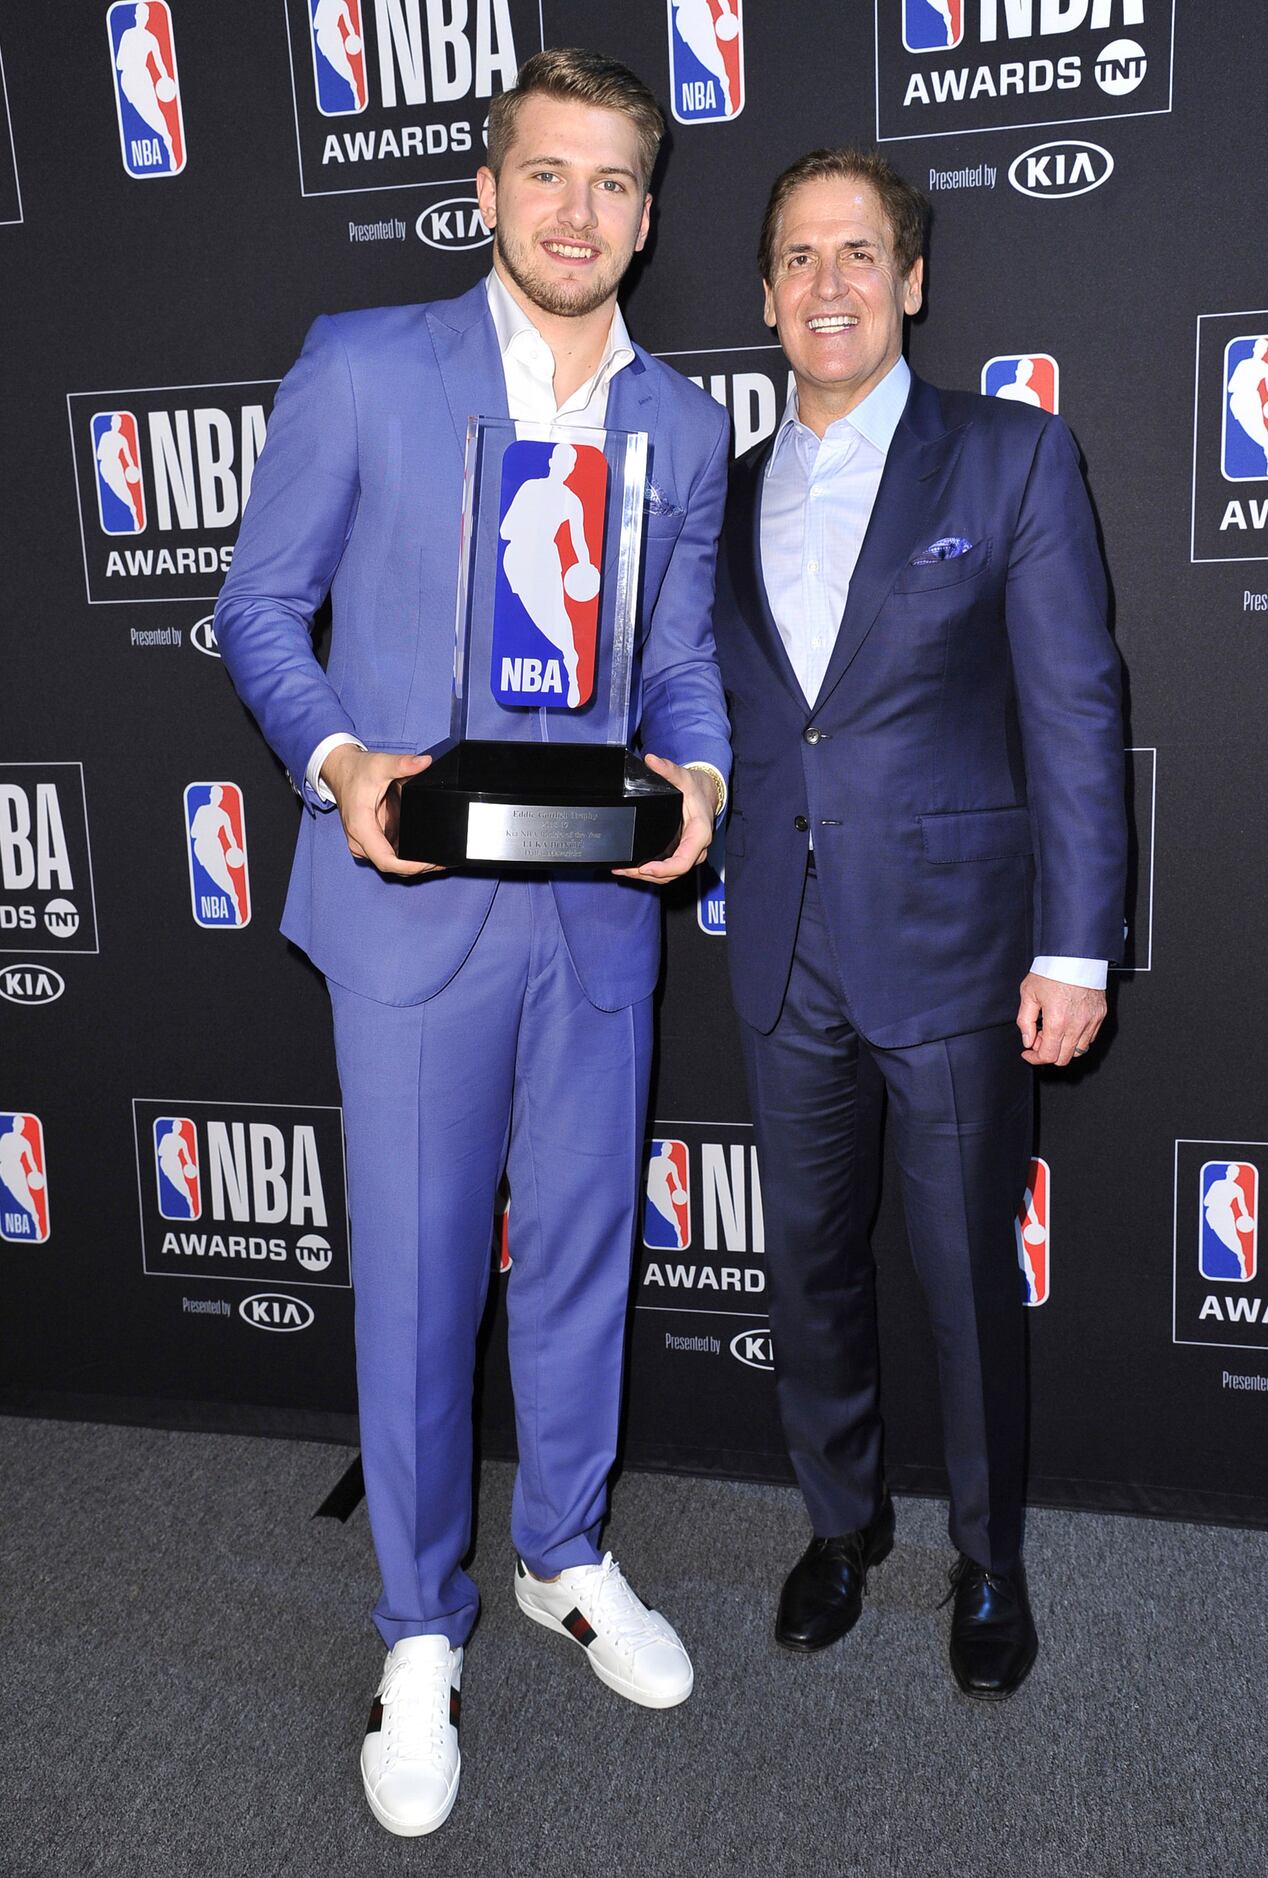 June 24, 2019: Luka Doncic, recipient of the NBA rookie of the year award, poses in the...